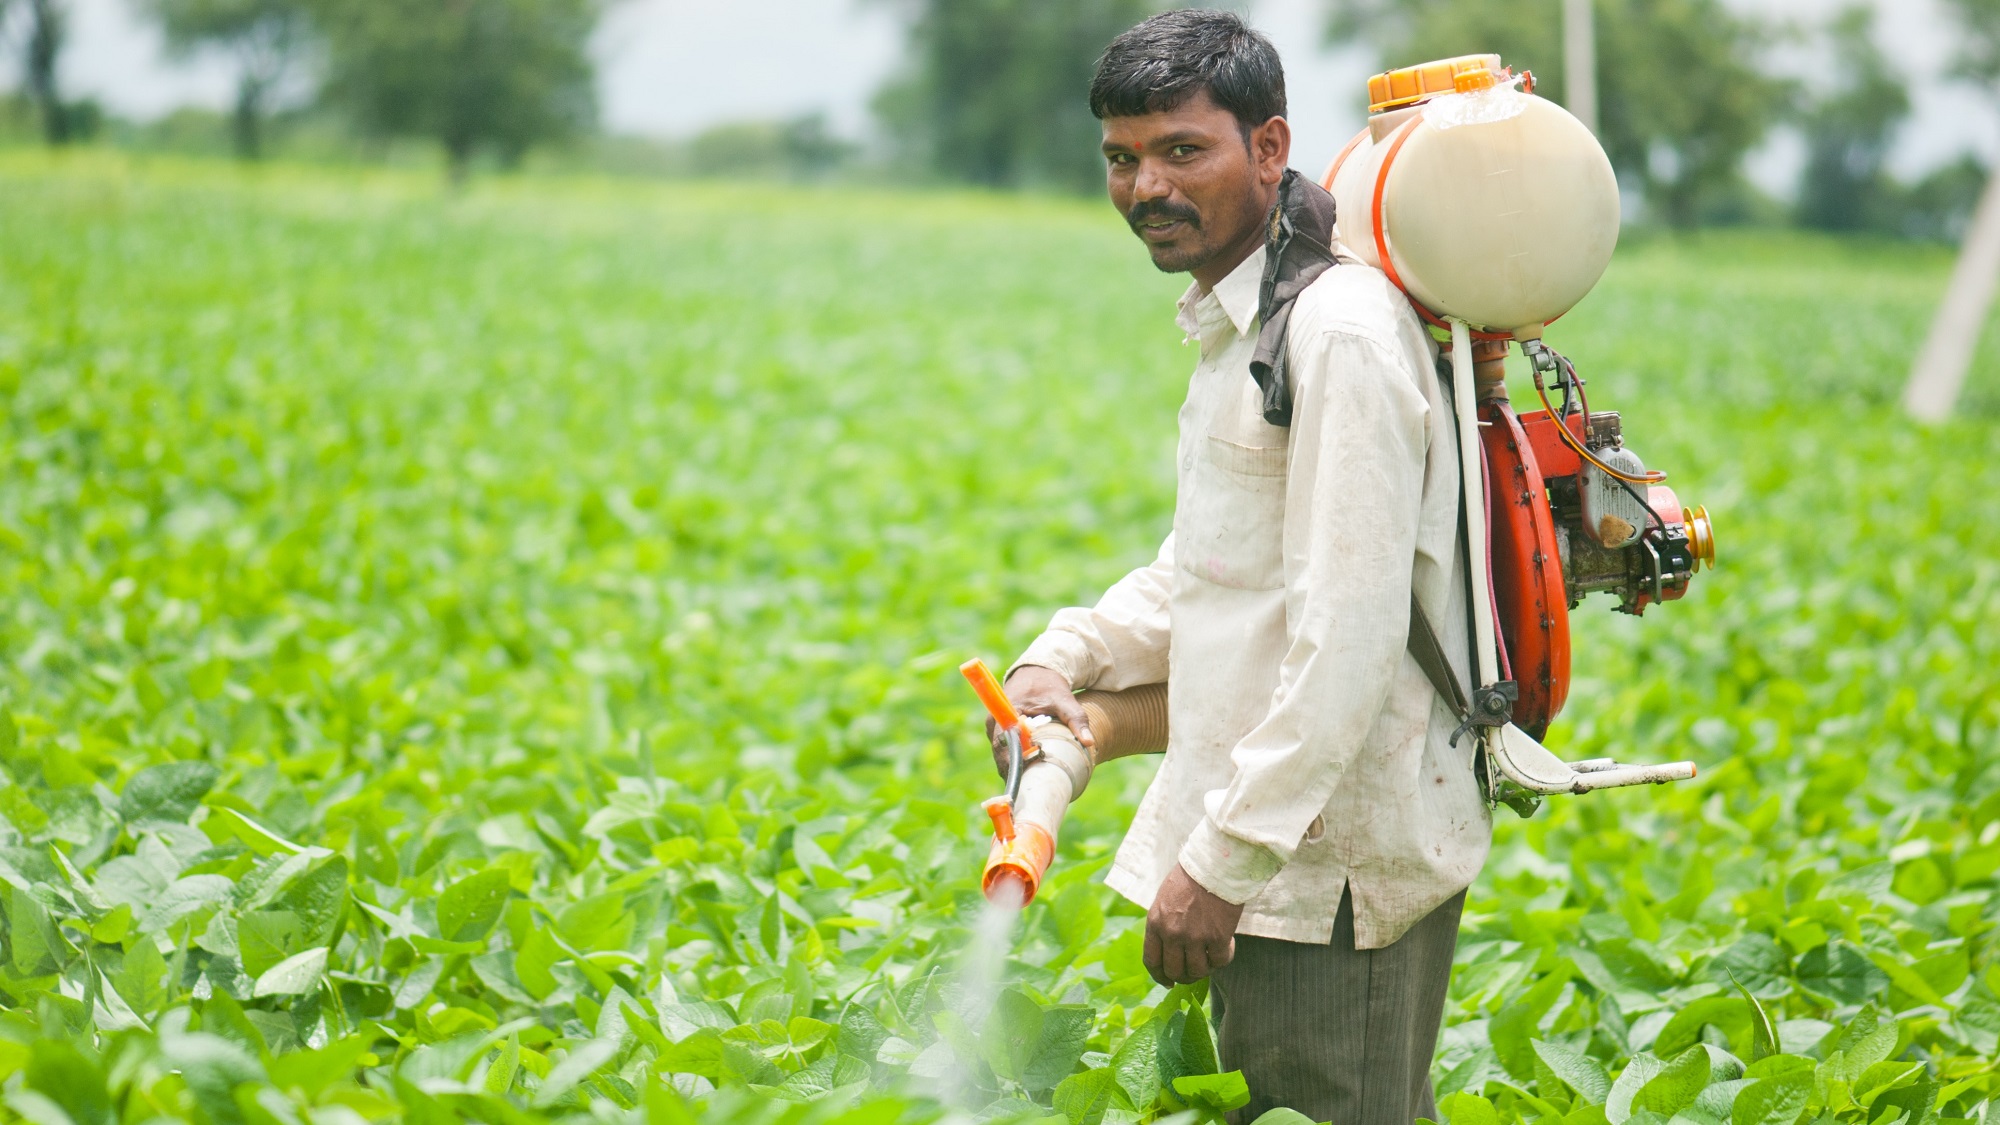 Farmer spraying pesticides on soy crop in India without protective gear